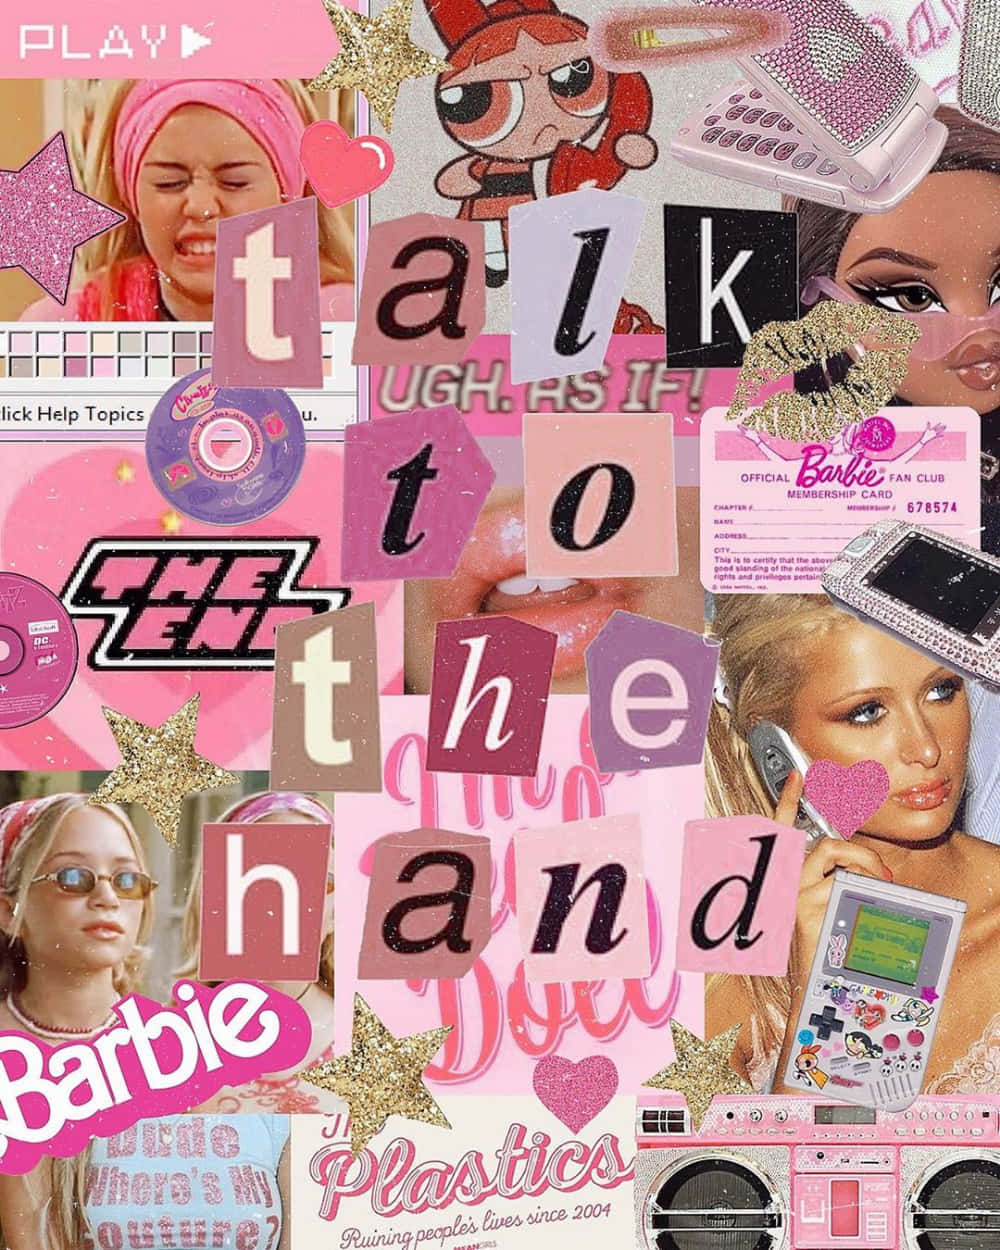 Look back in pink with this classic 90s aesthetic Wallpaper